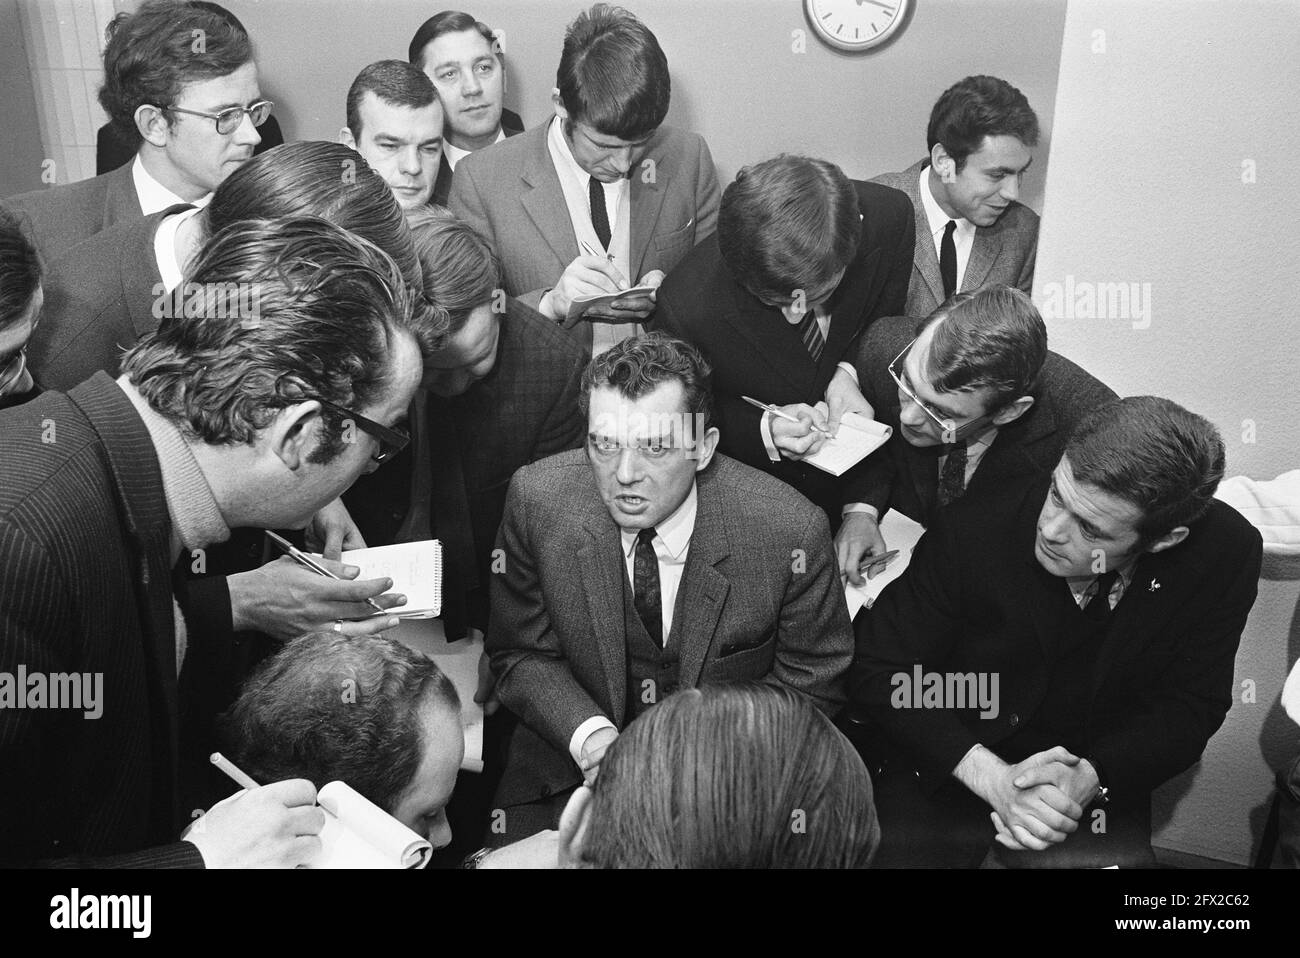 Draw in the quarter finals of the European Football Cup. Feyenoord drew against Vorwarts Berlin (East Germany). Trainer Ernst Happel speaks to the press, December 10, 1969, journalists, sports, trainers, soccer, The Netherlands, 20th century press agency photo, news to remember, documentary, historic photography 1945-1990, visual stories, human history of the Twentieth Century, capturing moments in time Stock Photo